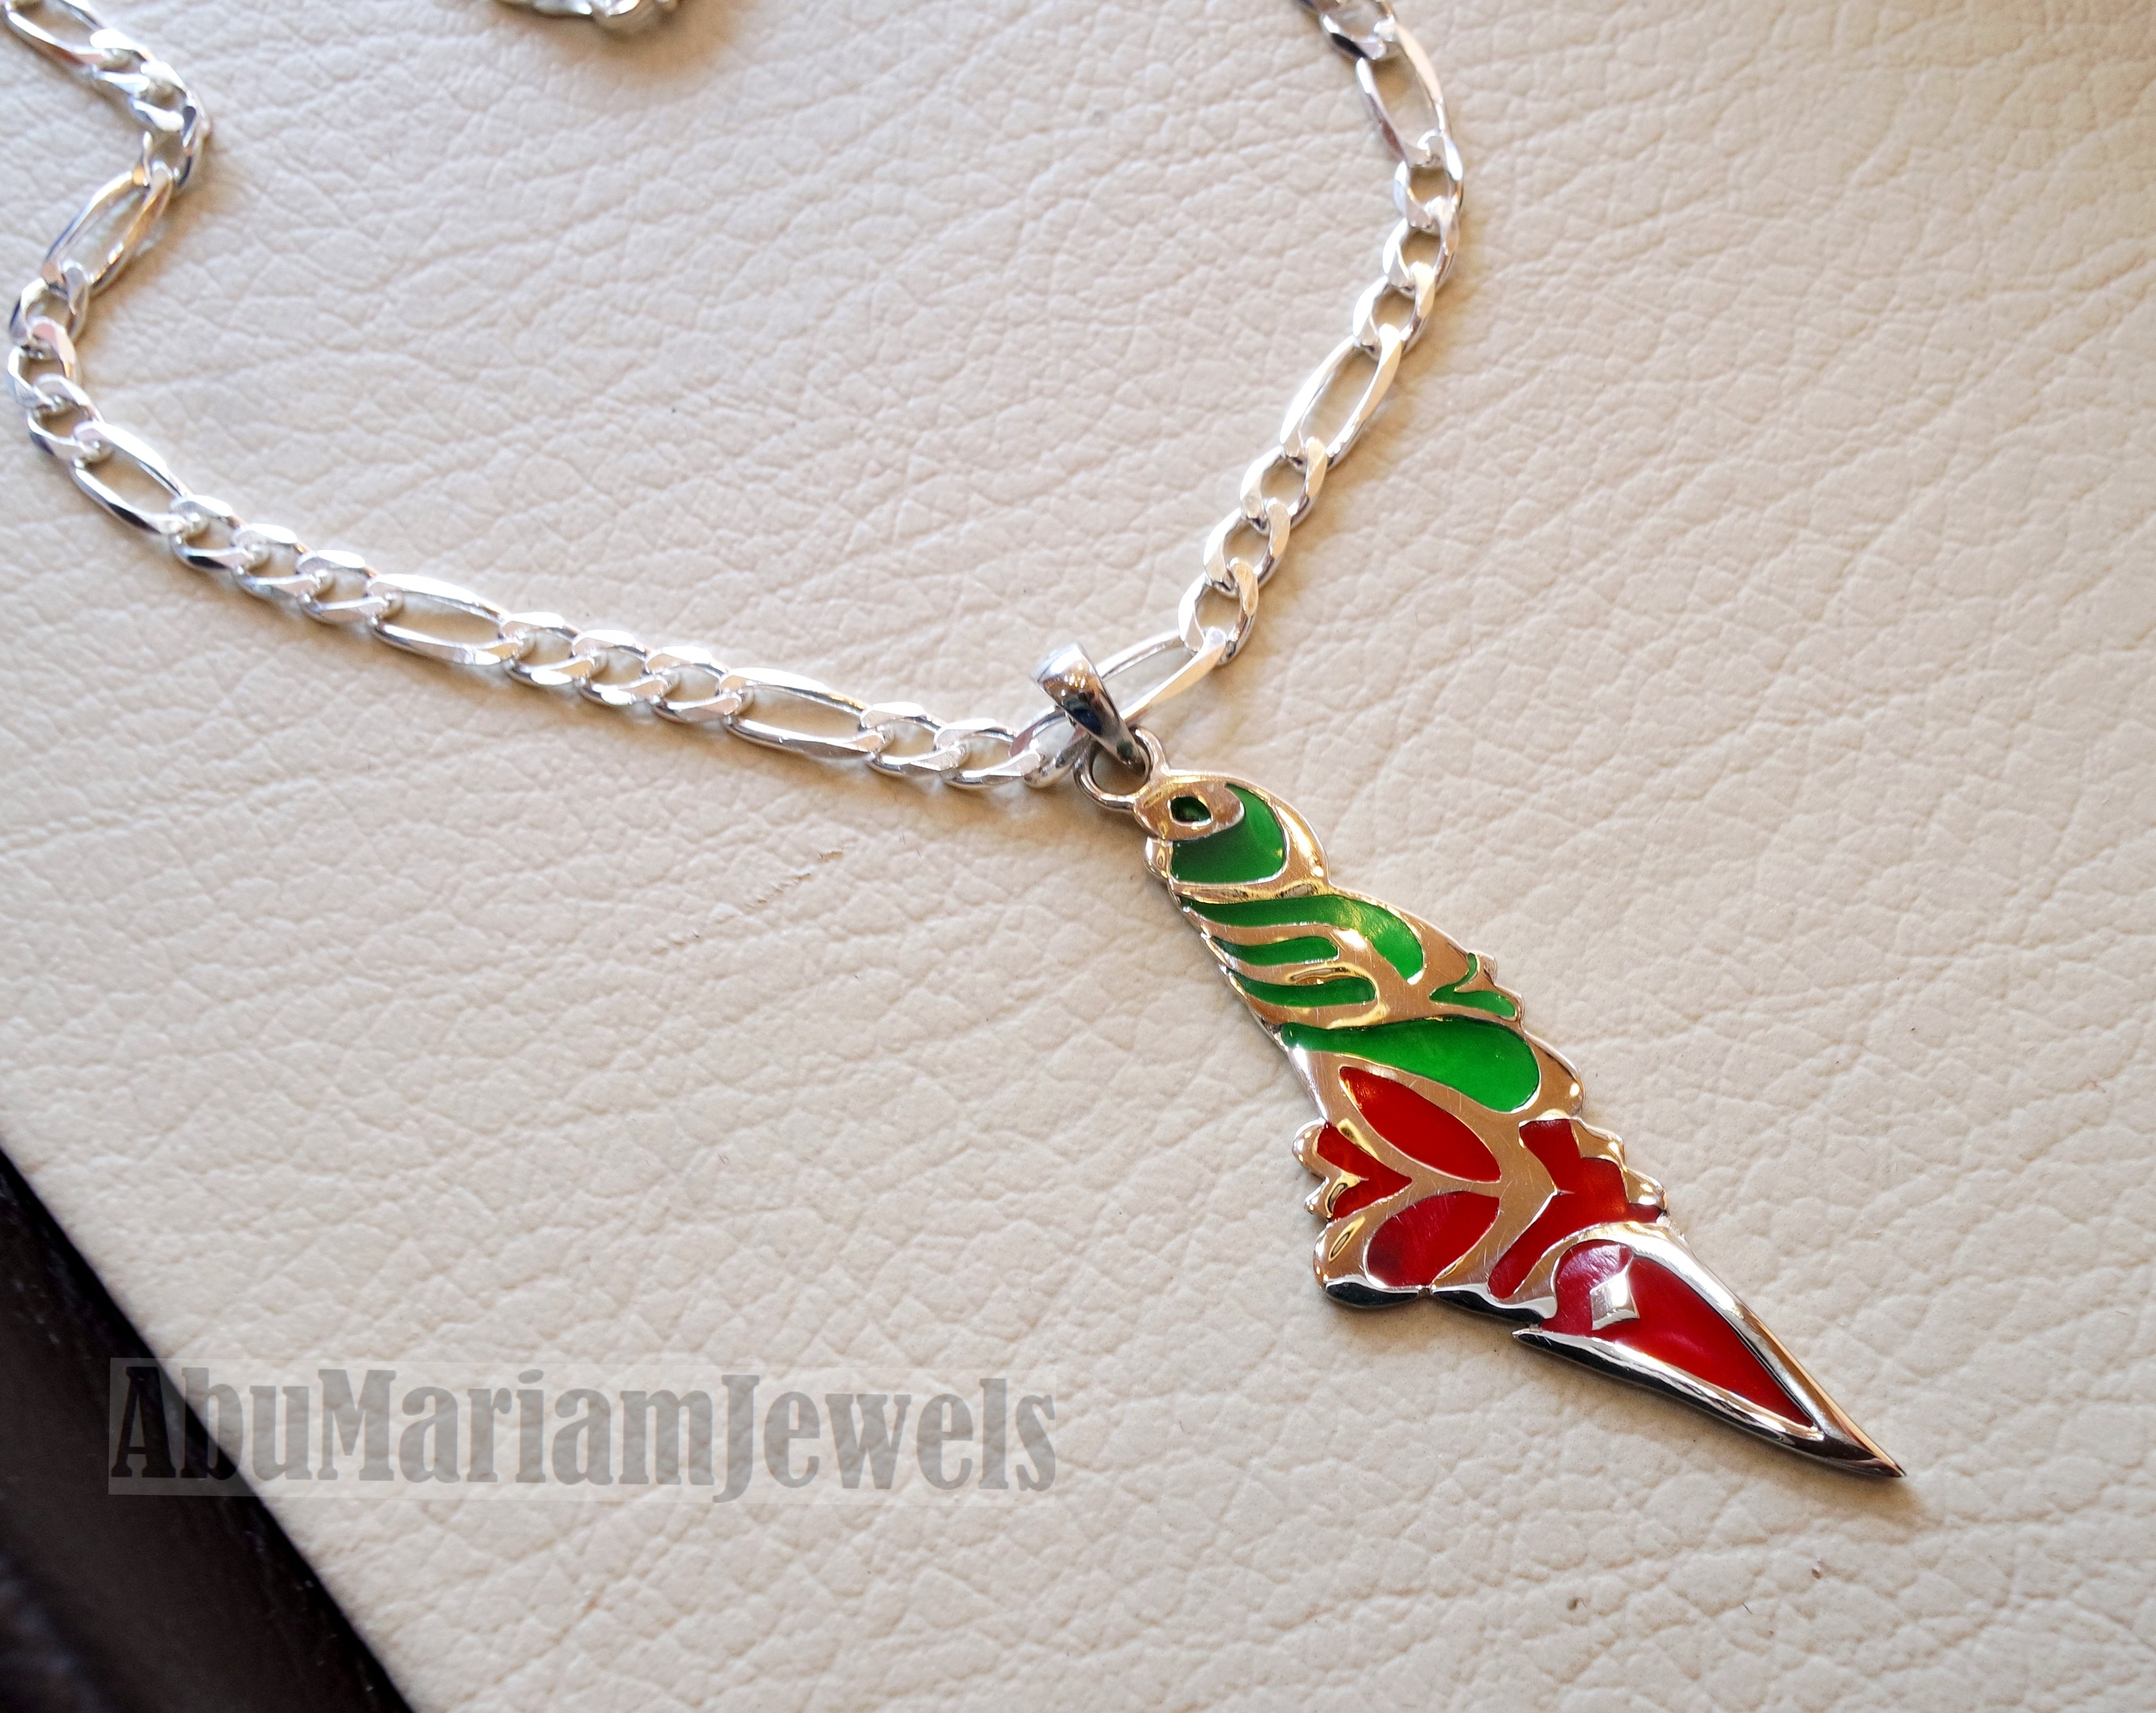 Palestine necklace map pendant with thick chain sterling silver 925 colorful enamel jewelry arabic calligraphy fast shipping خارطه فلسطين